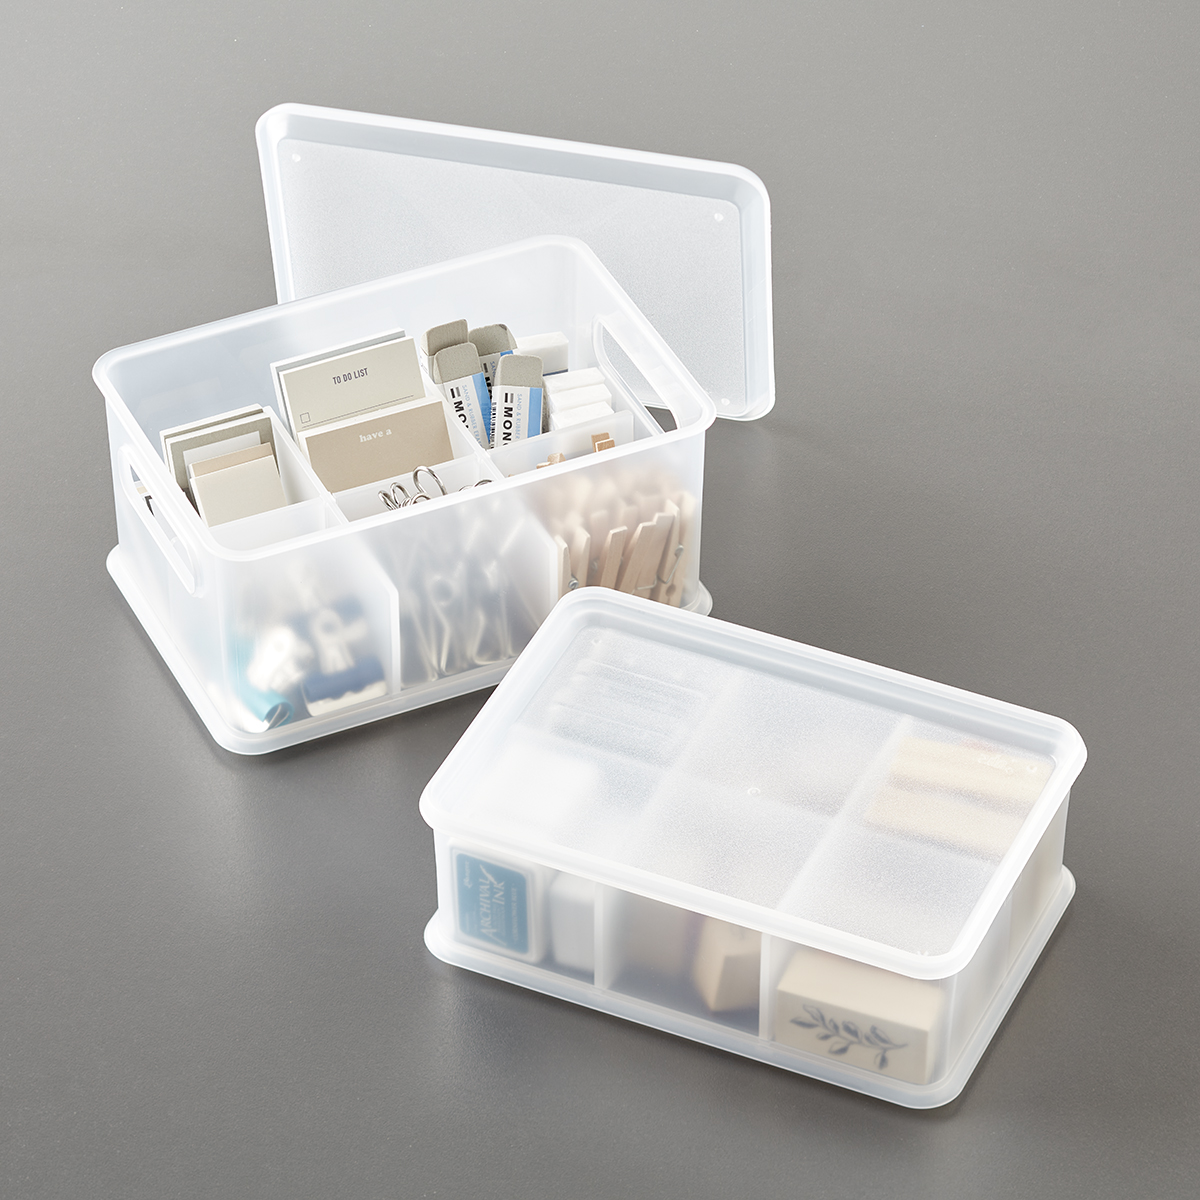 Shimo Lidded Storage Bins | The Container Store